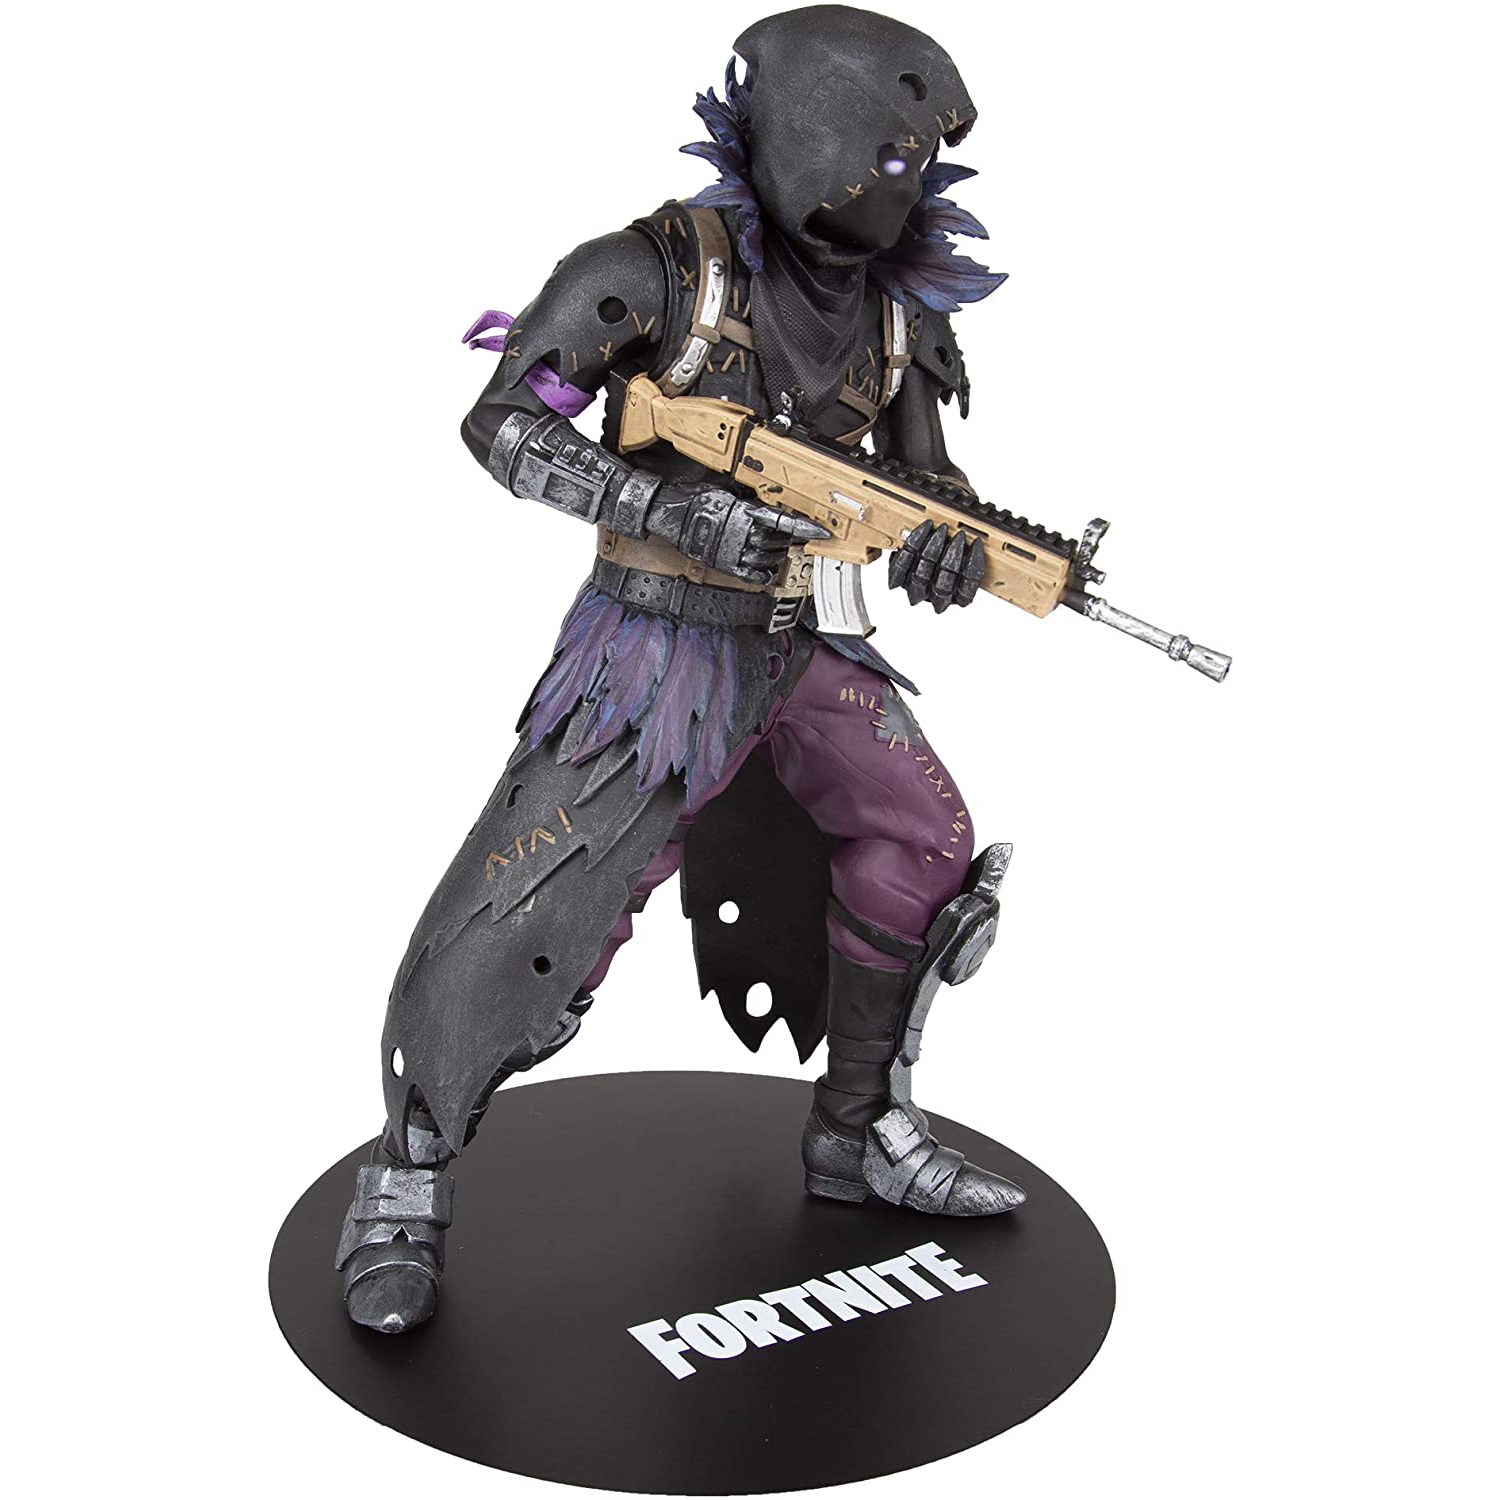 Mcfarlane Toys Fortnite Deluxe Box 11" Scale Scale Figures  Raven